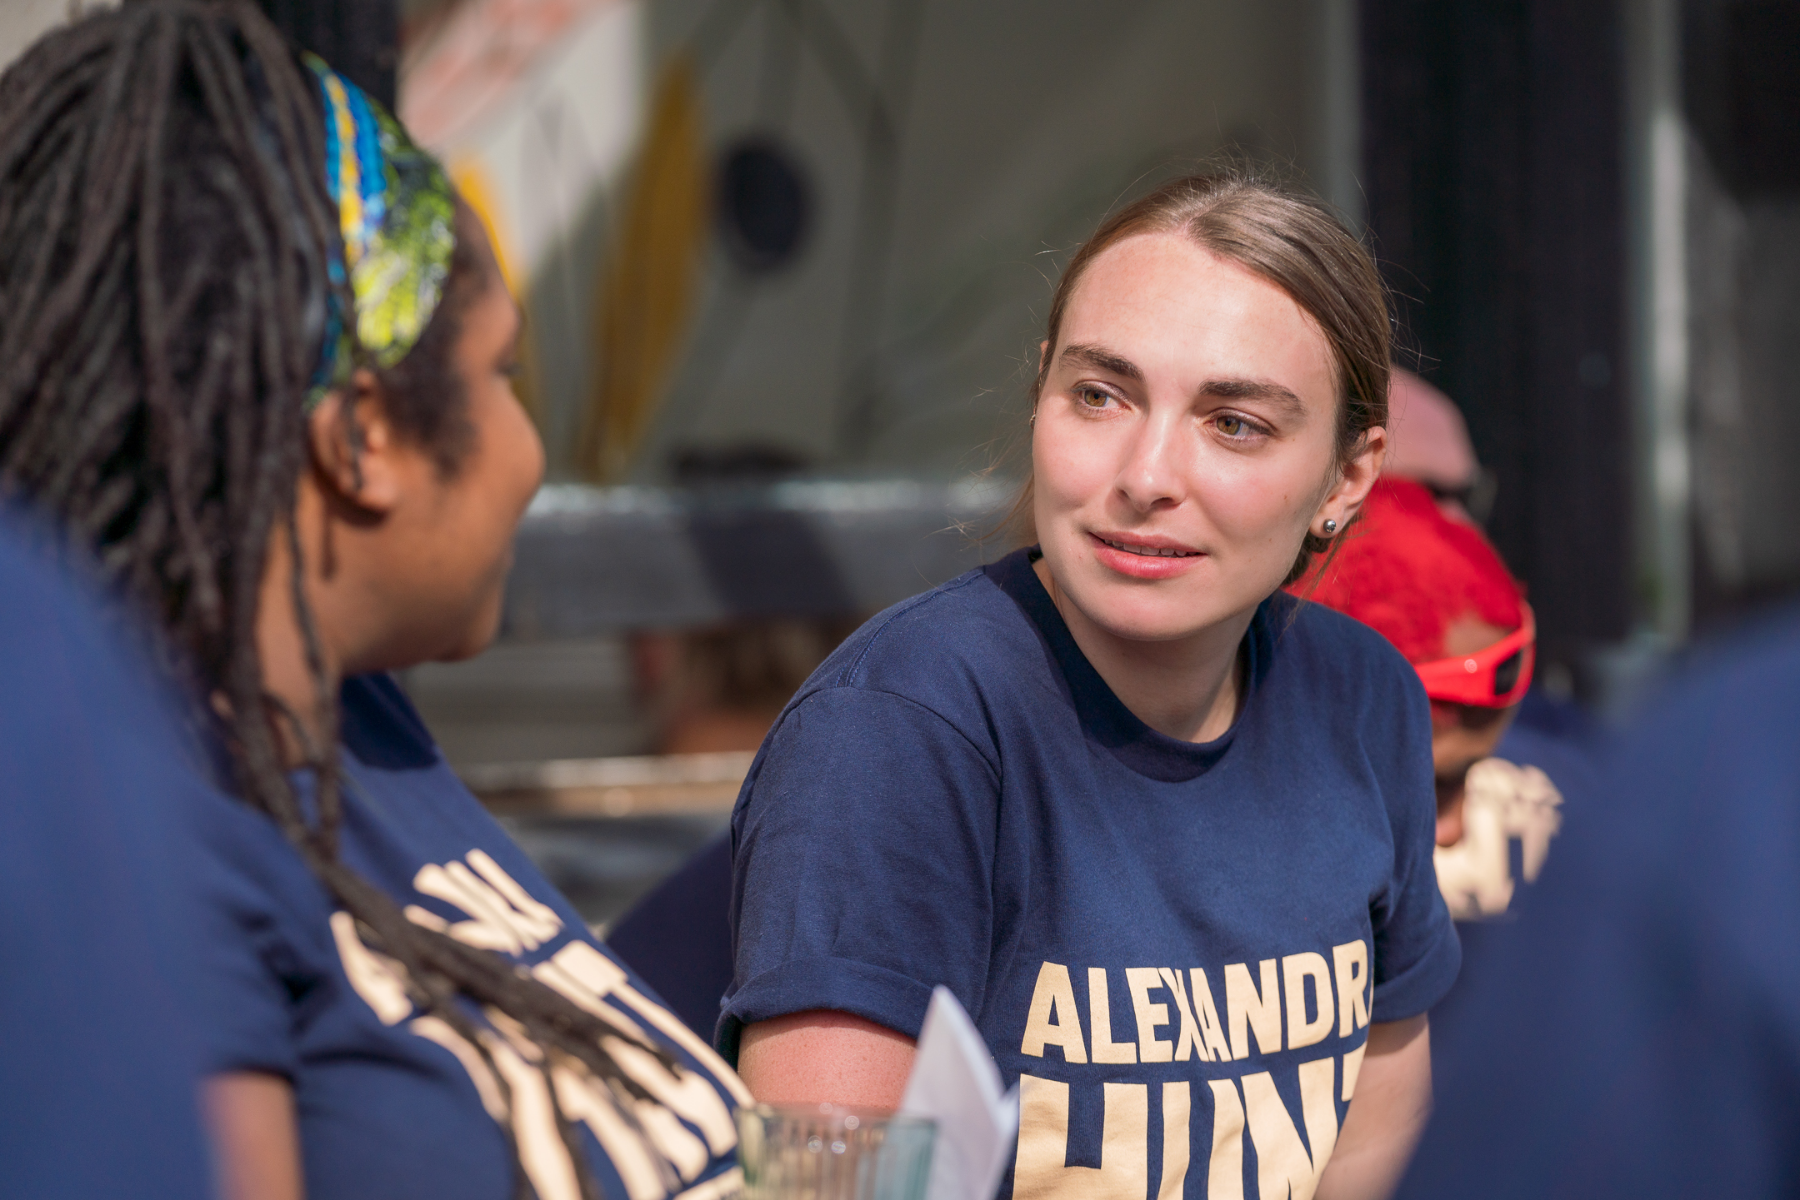 Alexandra Hunt talks to a black girl while wearing a blue shirt with her name on it